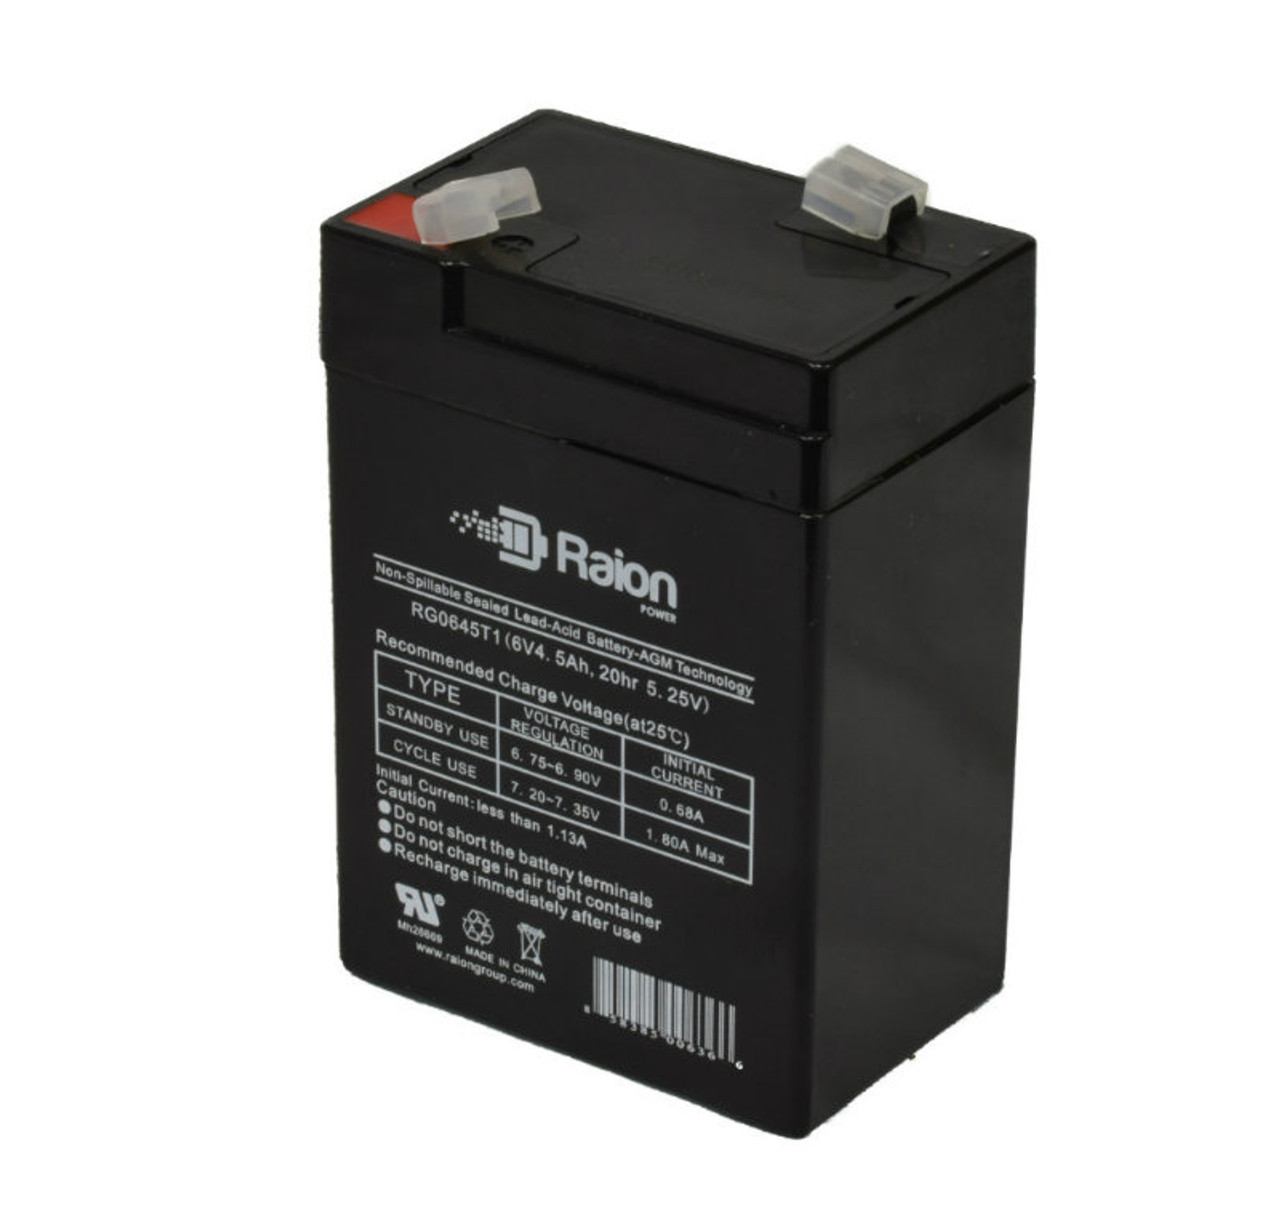 Raion Power RG0645T1 6V 4.5Ah Replacement Battery Cartridge for Philips Medical Systems HC102